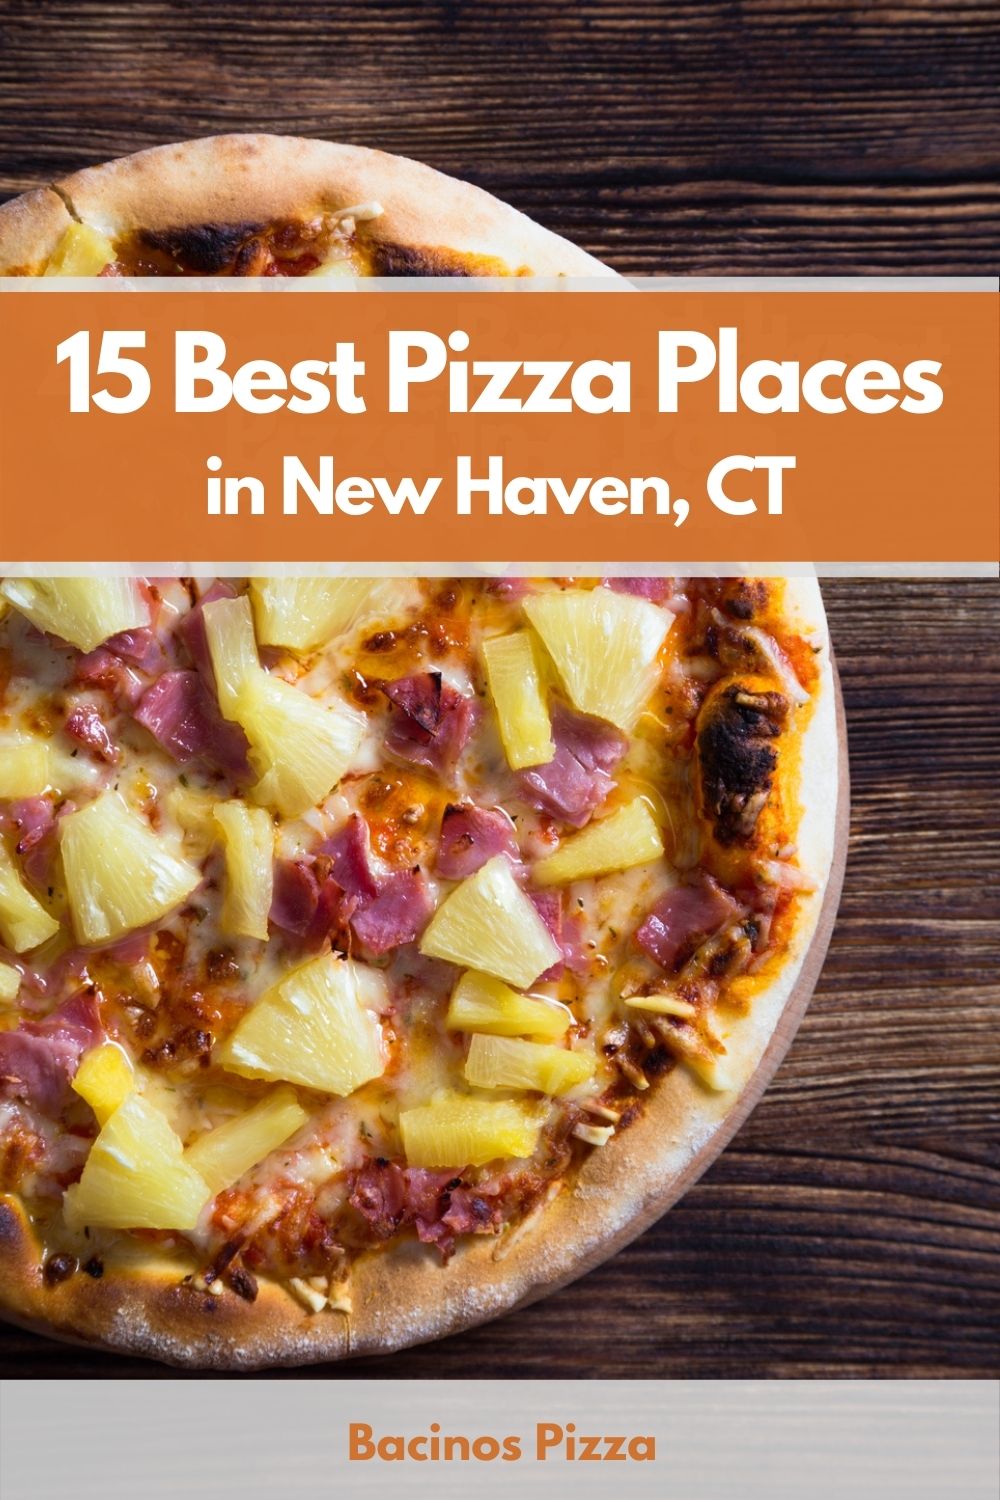 15 Best Pizza Places in New Haven, CT pin